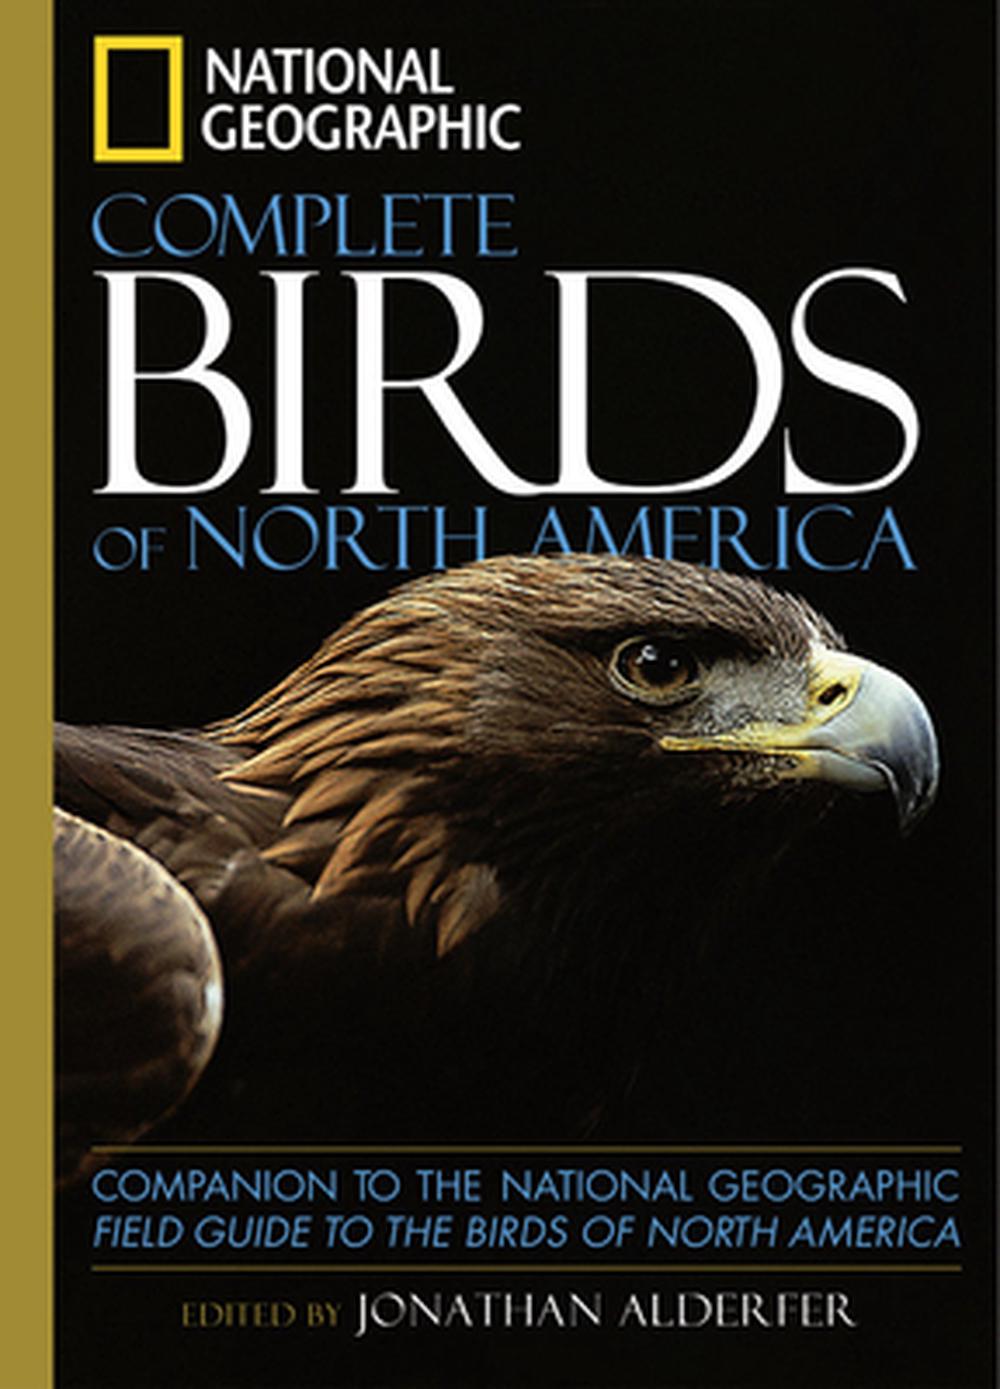 National Geographic Complete Birds of North America by Jonathan K